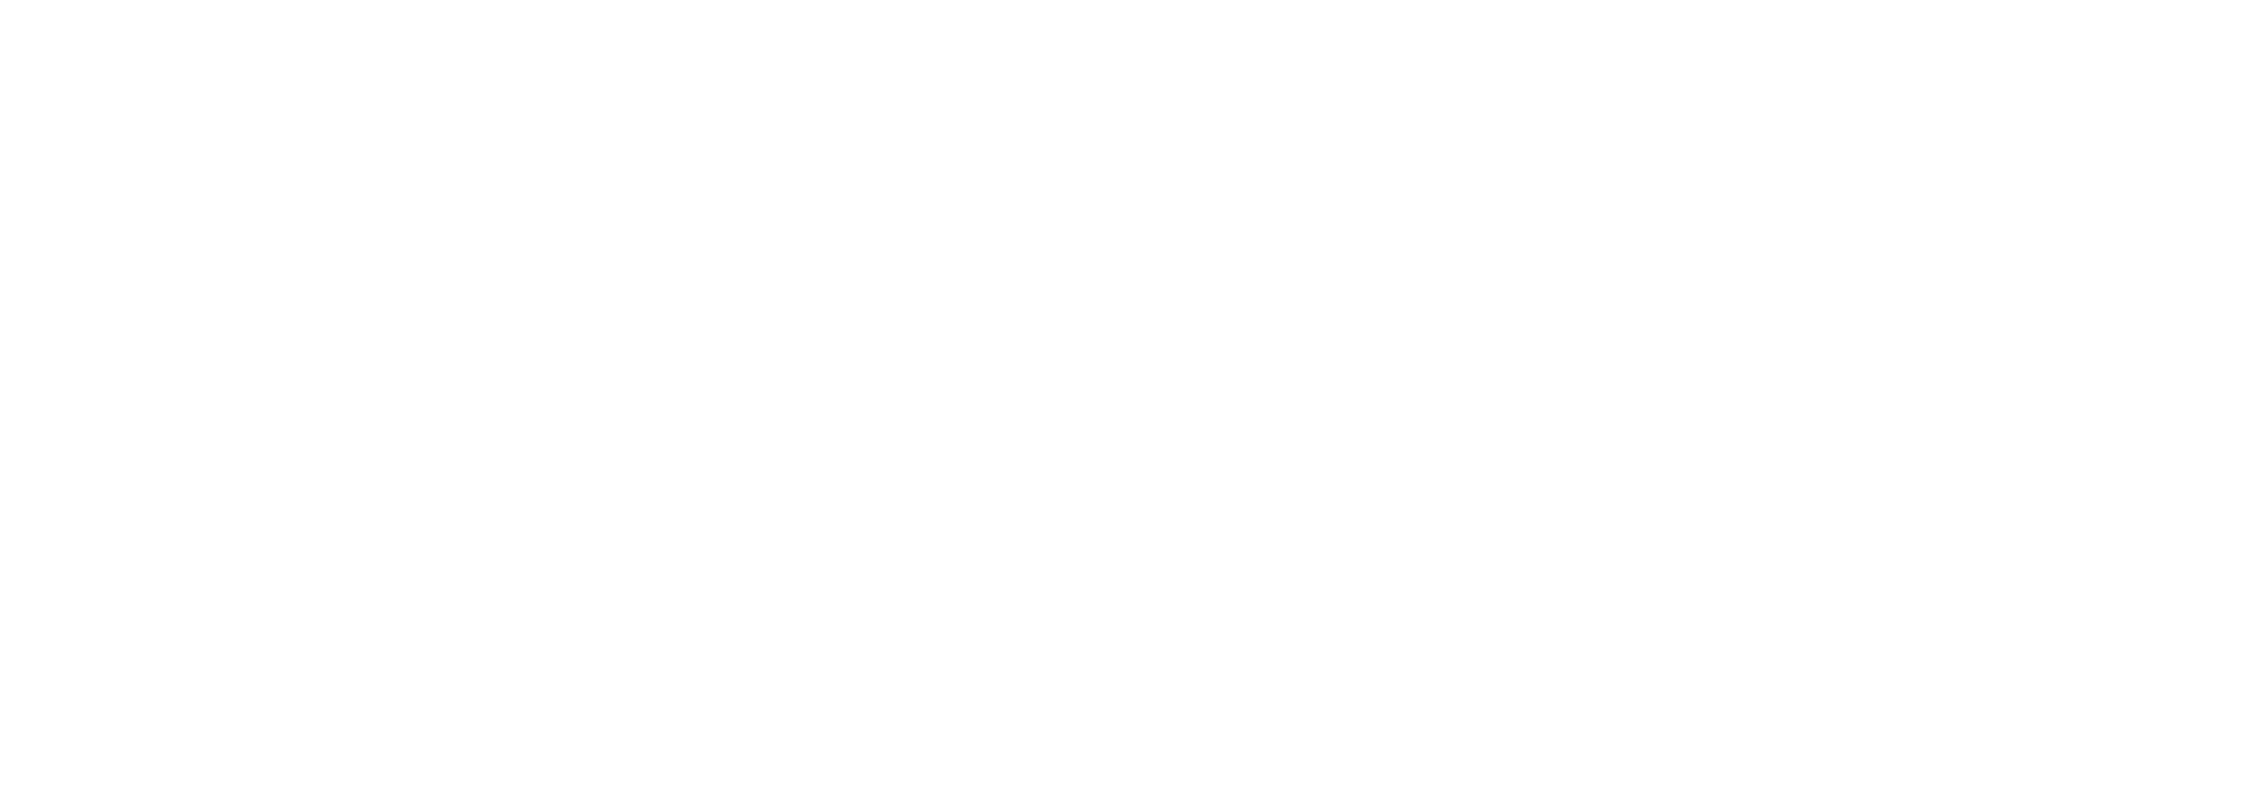 Actionable.co